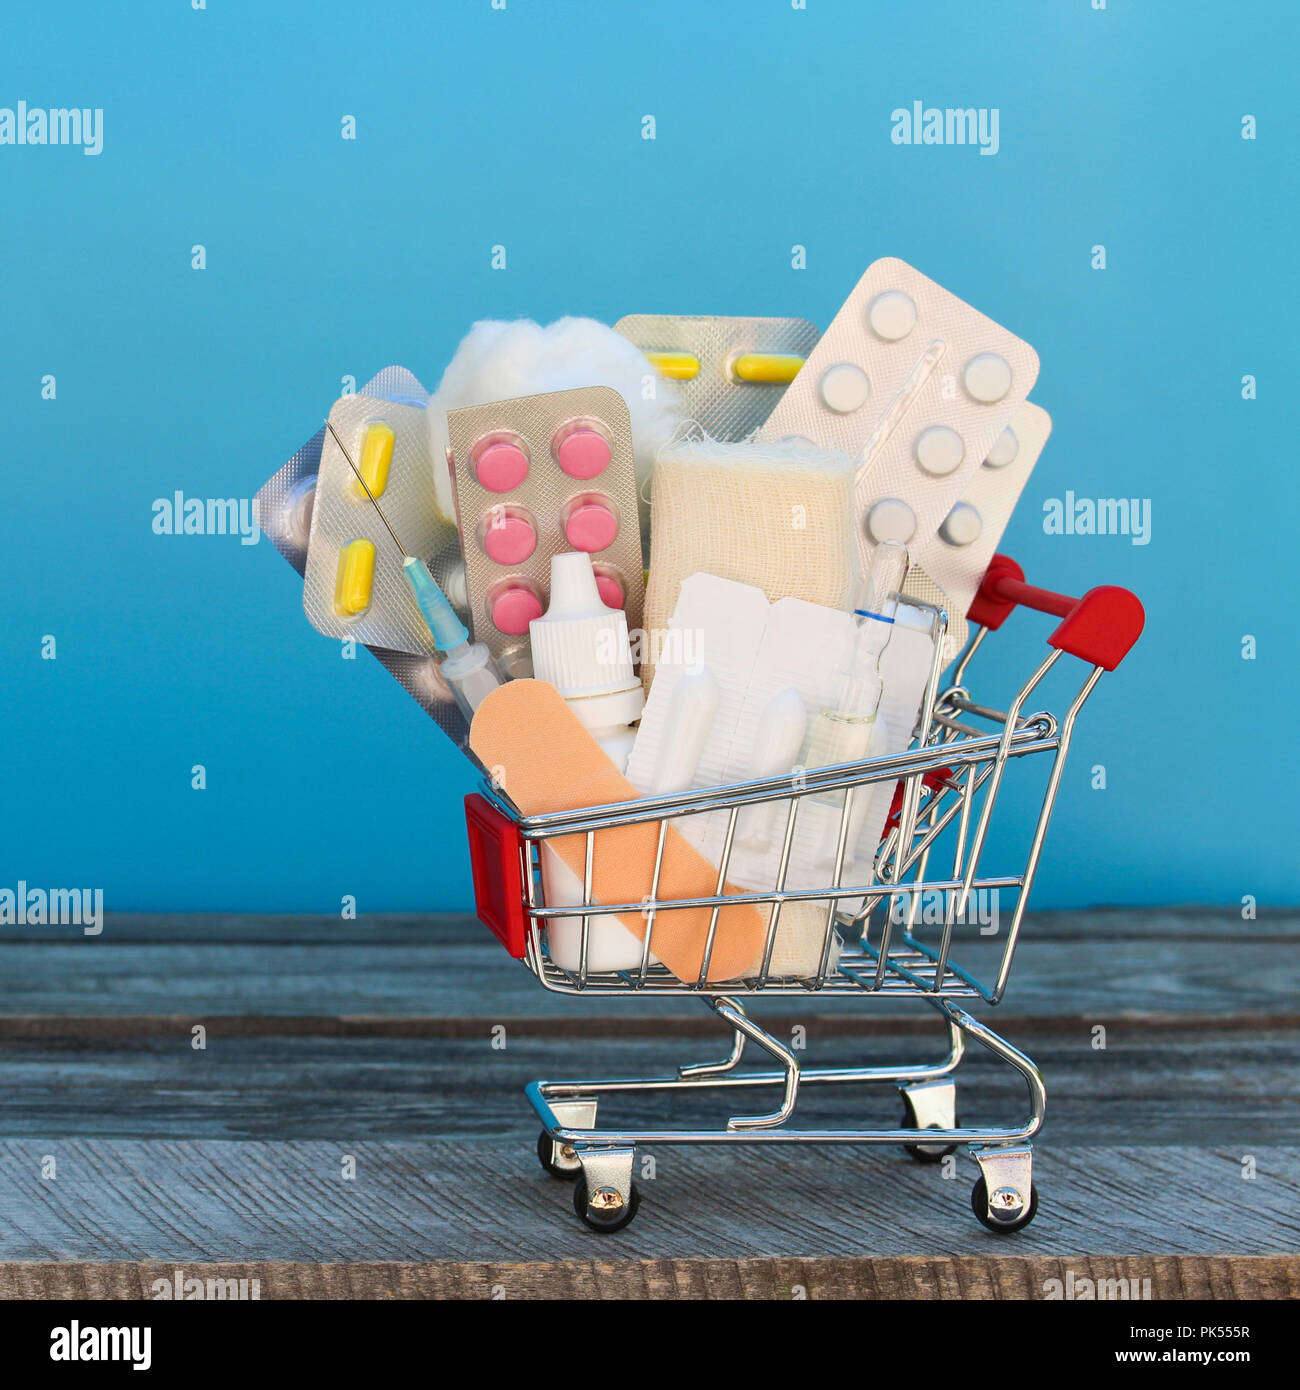 Shopping cart with medication on a blue background. Stock Photo